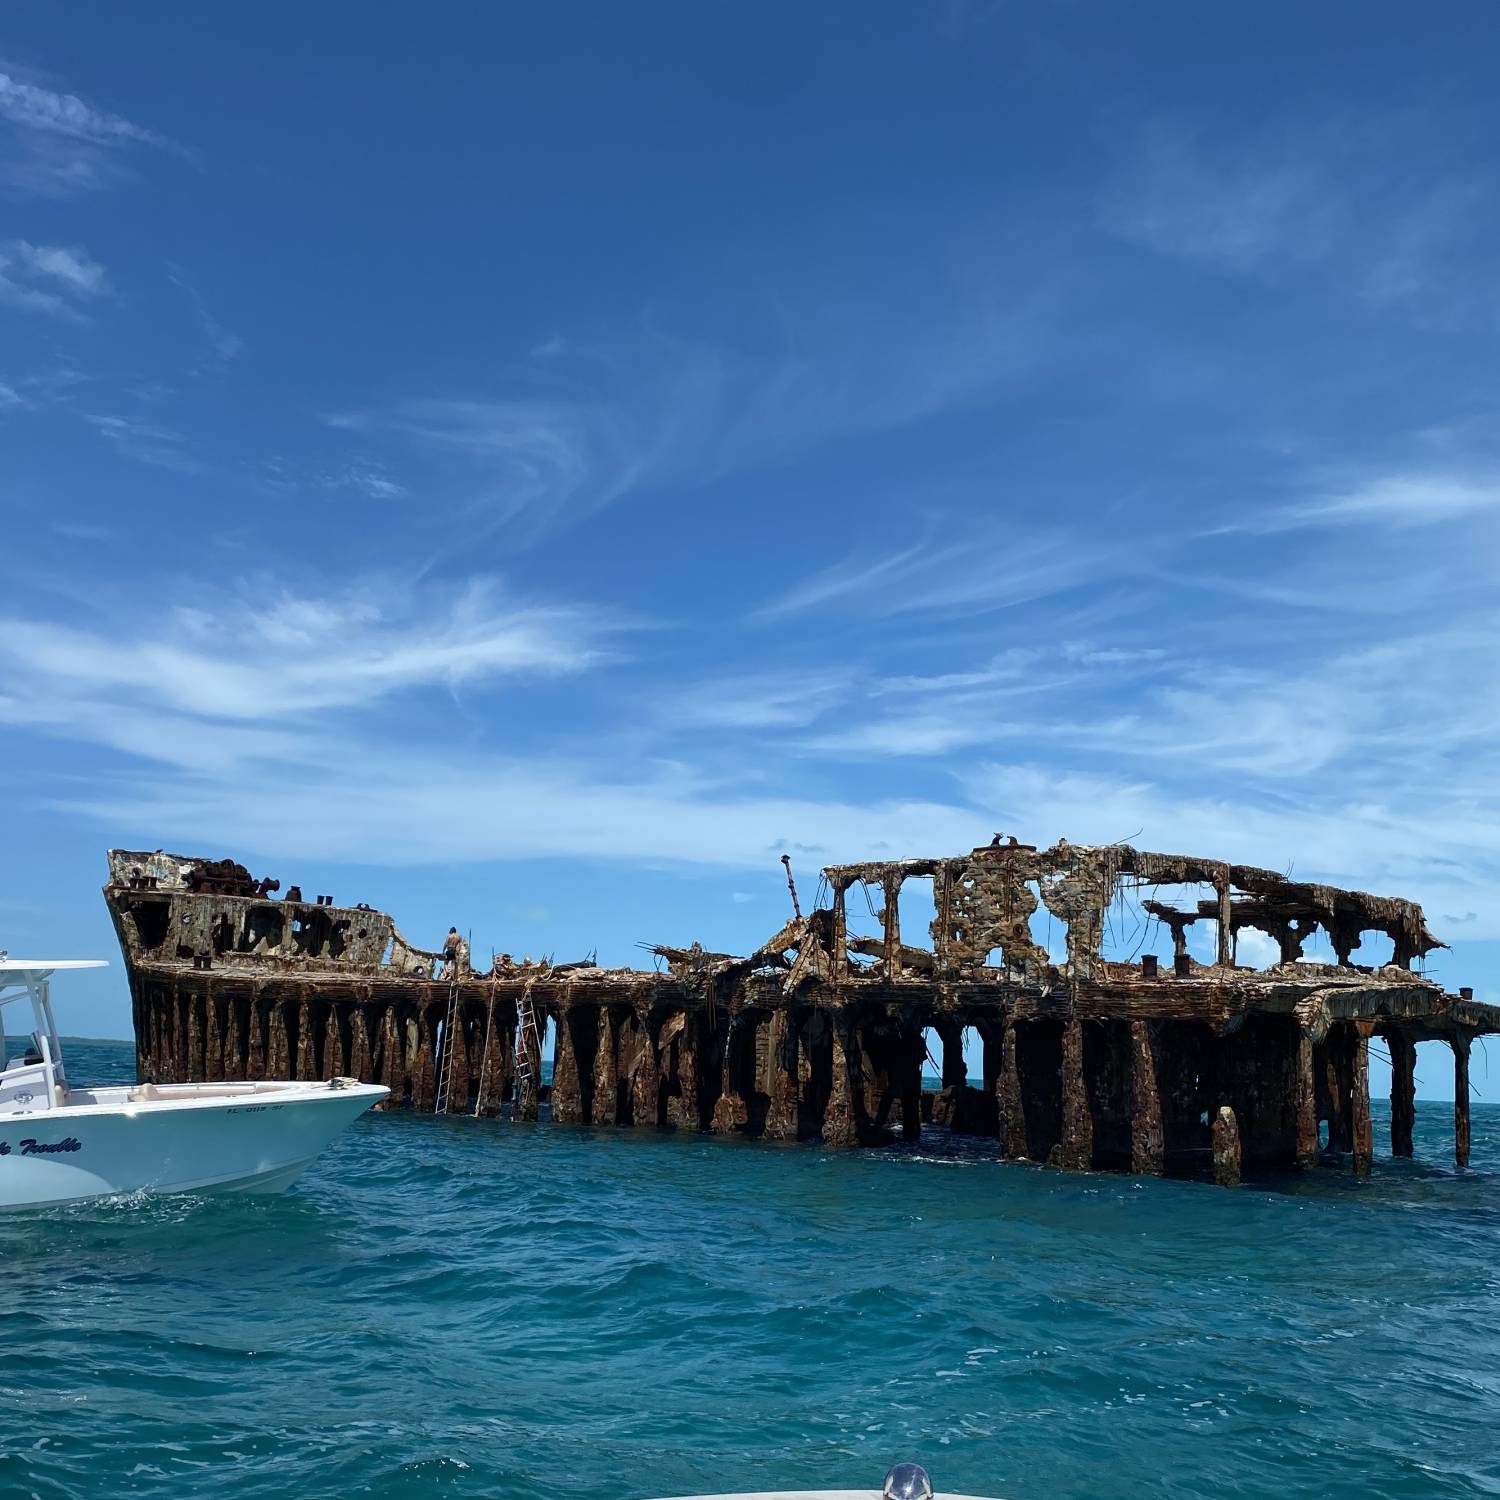 Title: Sapona ship wreck - On board their Sportsman Open 232 Center Console - Location: Bimini. Participating in the Photo Contest #SportsmanSeptember